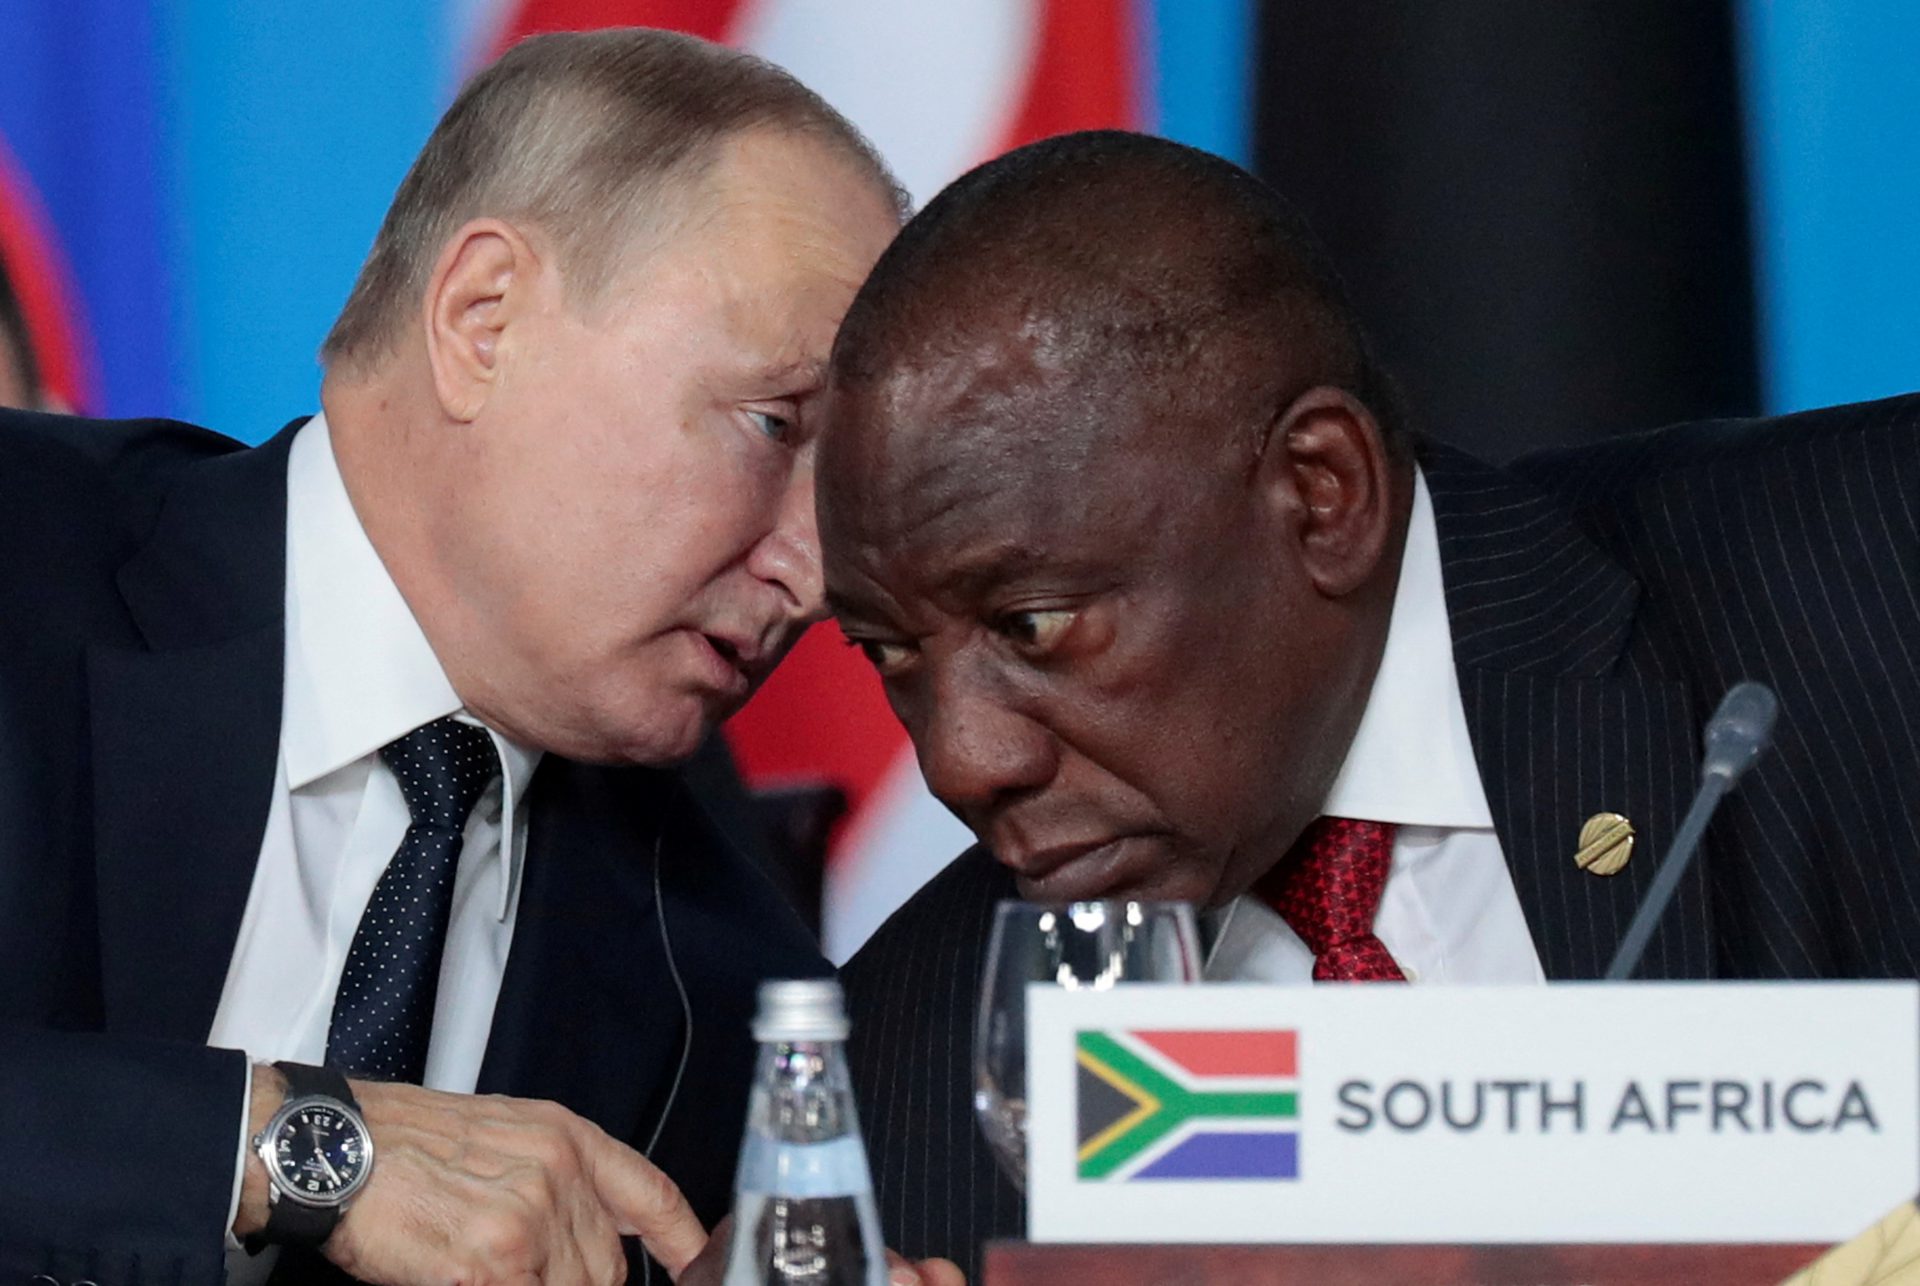 BRICS: South Africa Committed to Summit Despite Putin Warrant